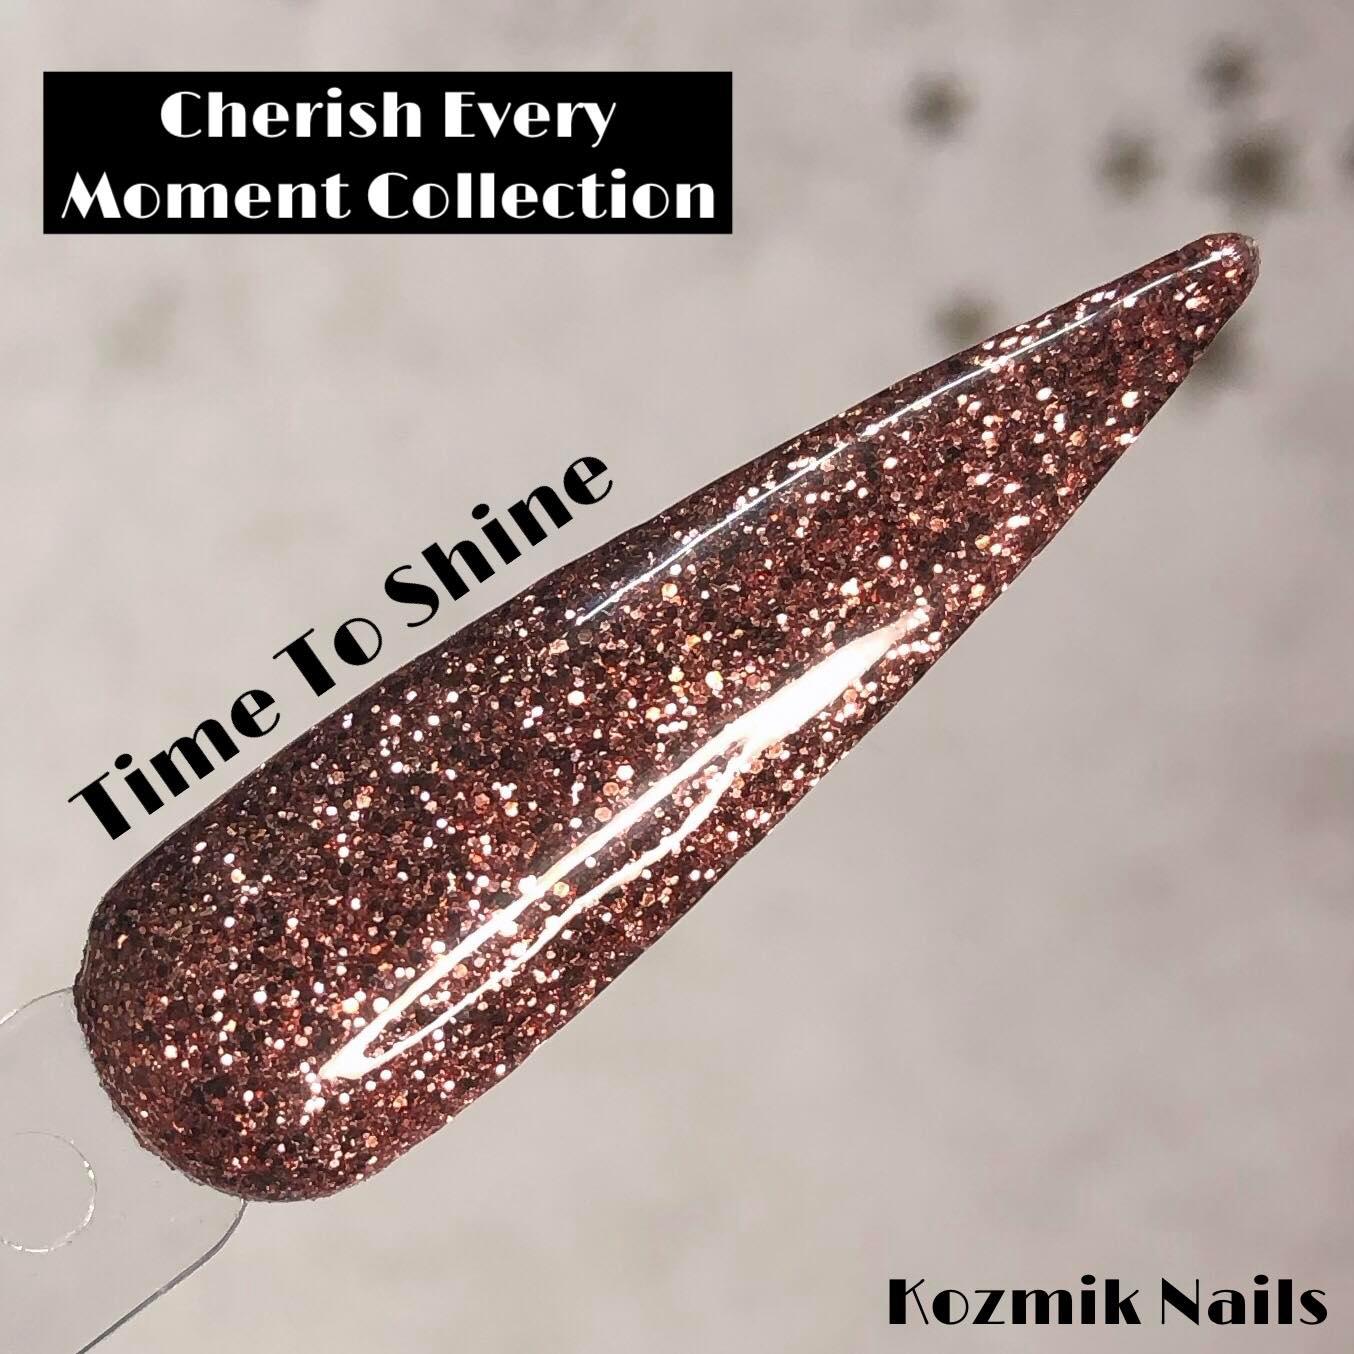 Cherish Every Moment Collection